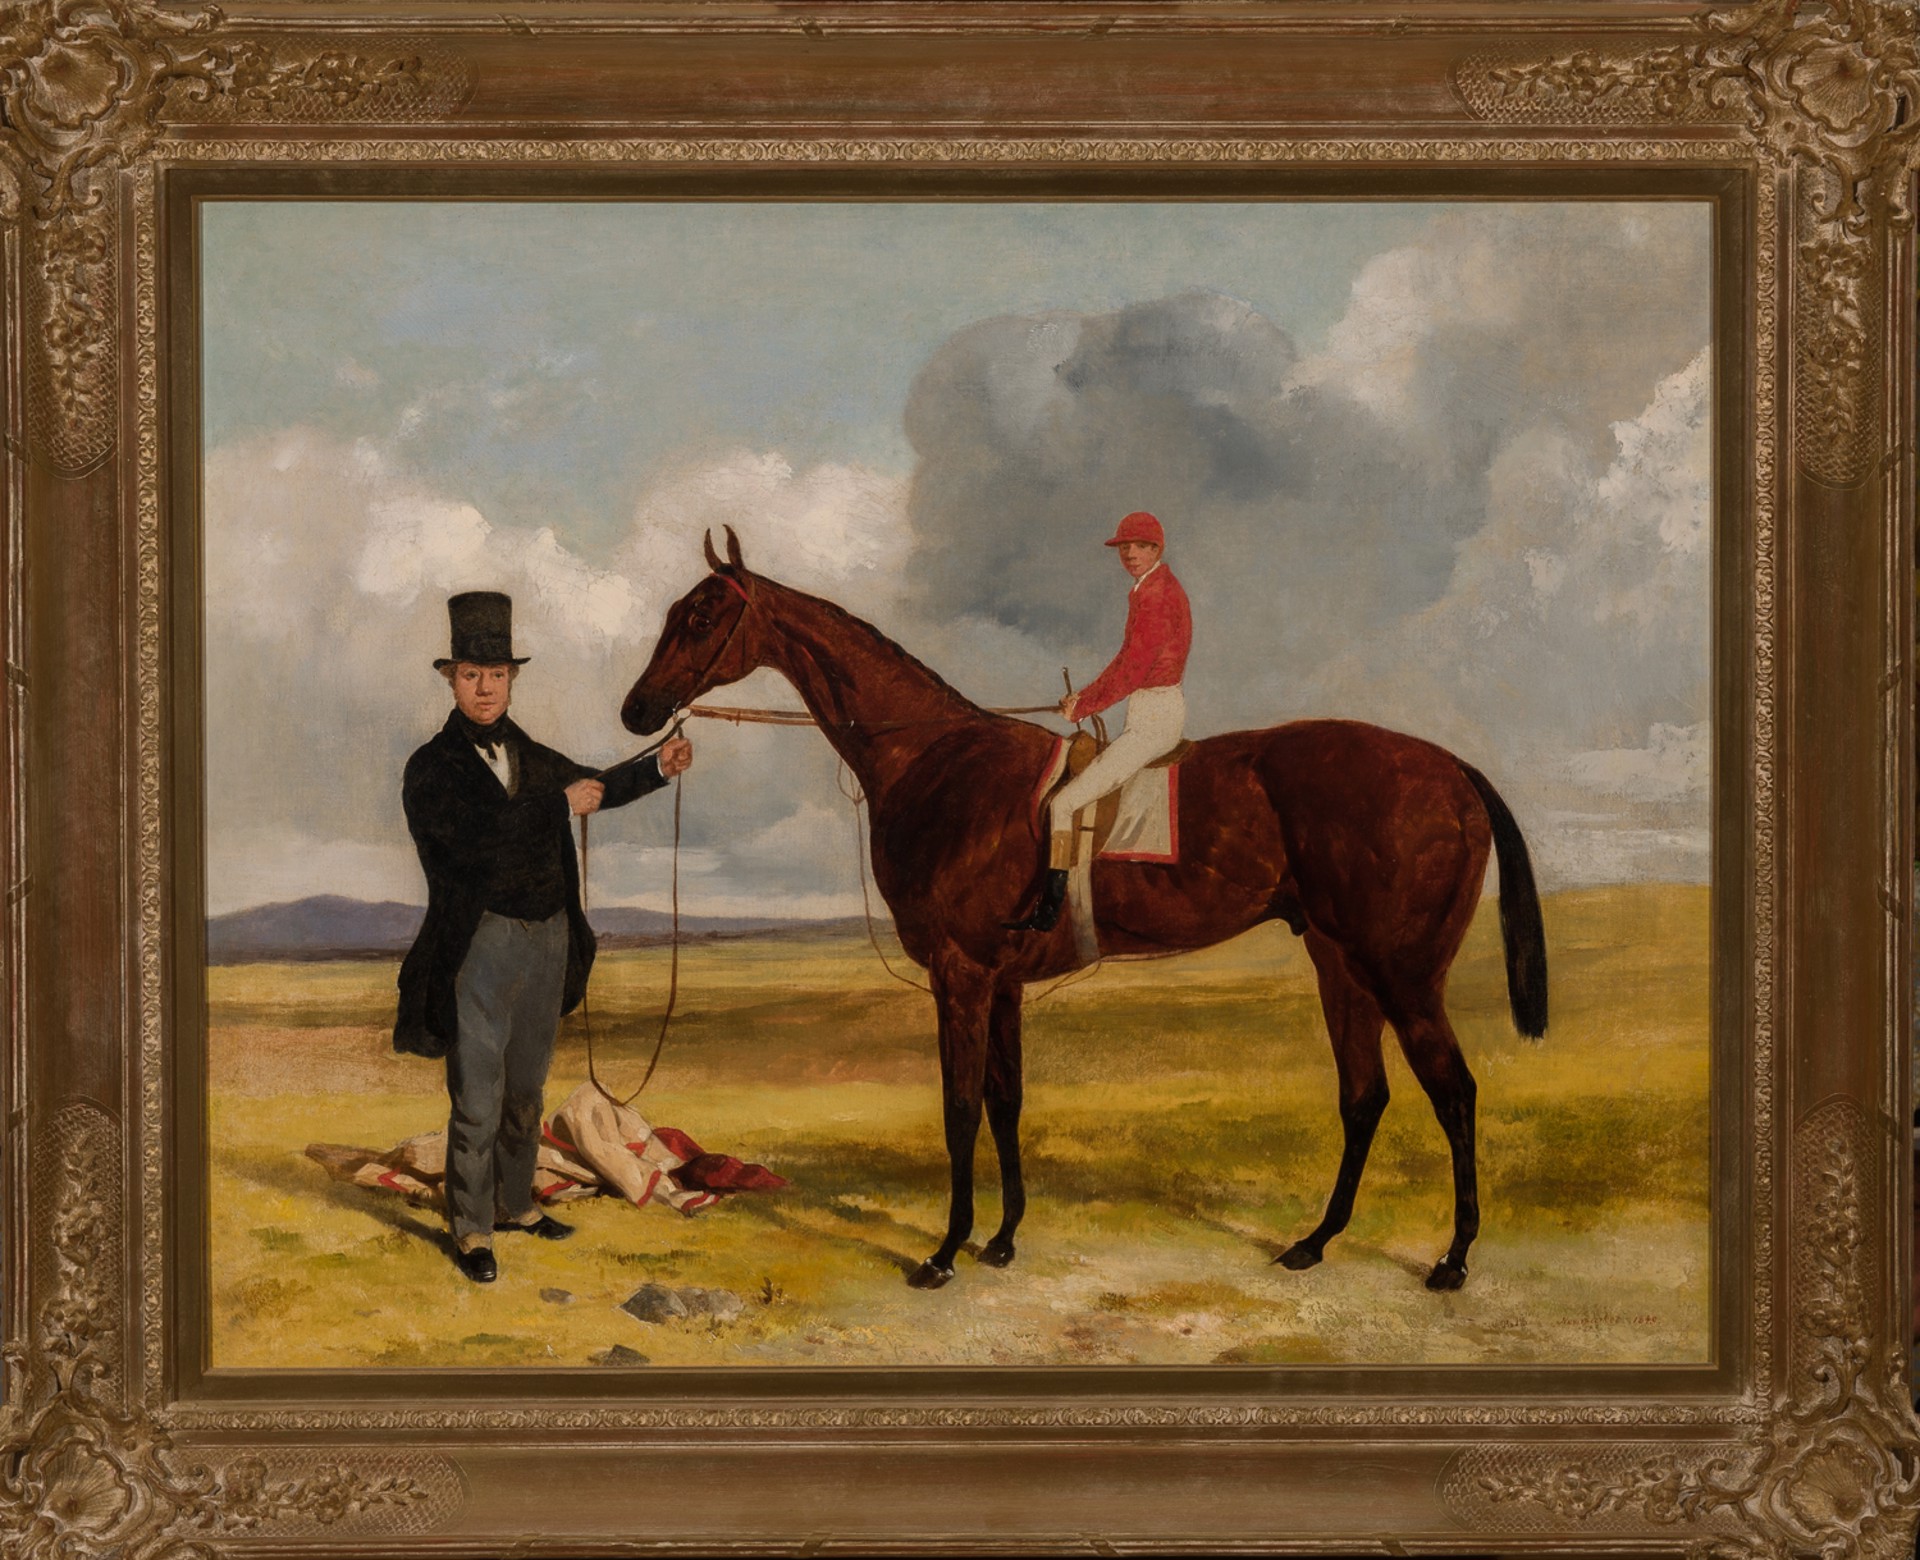 A Trainer Holding a Bay Racehorse Jockey Up at Newmarket by Harry Hall